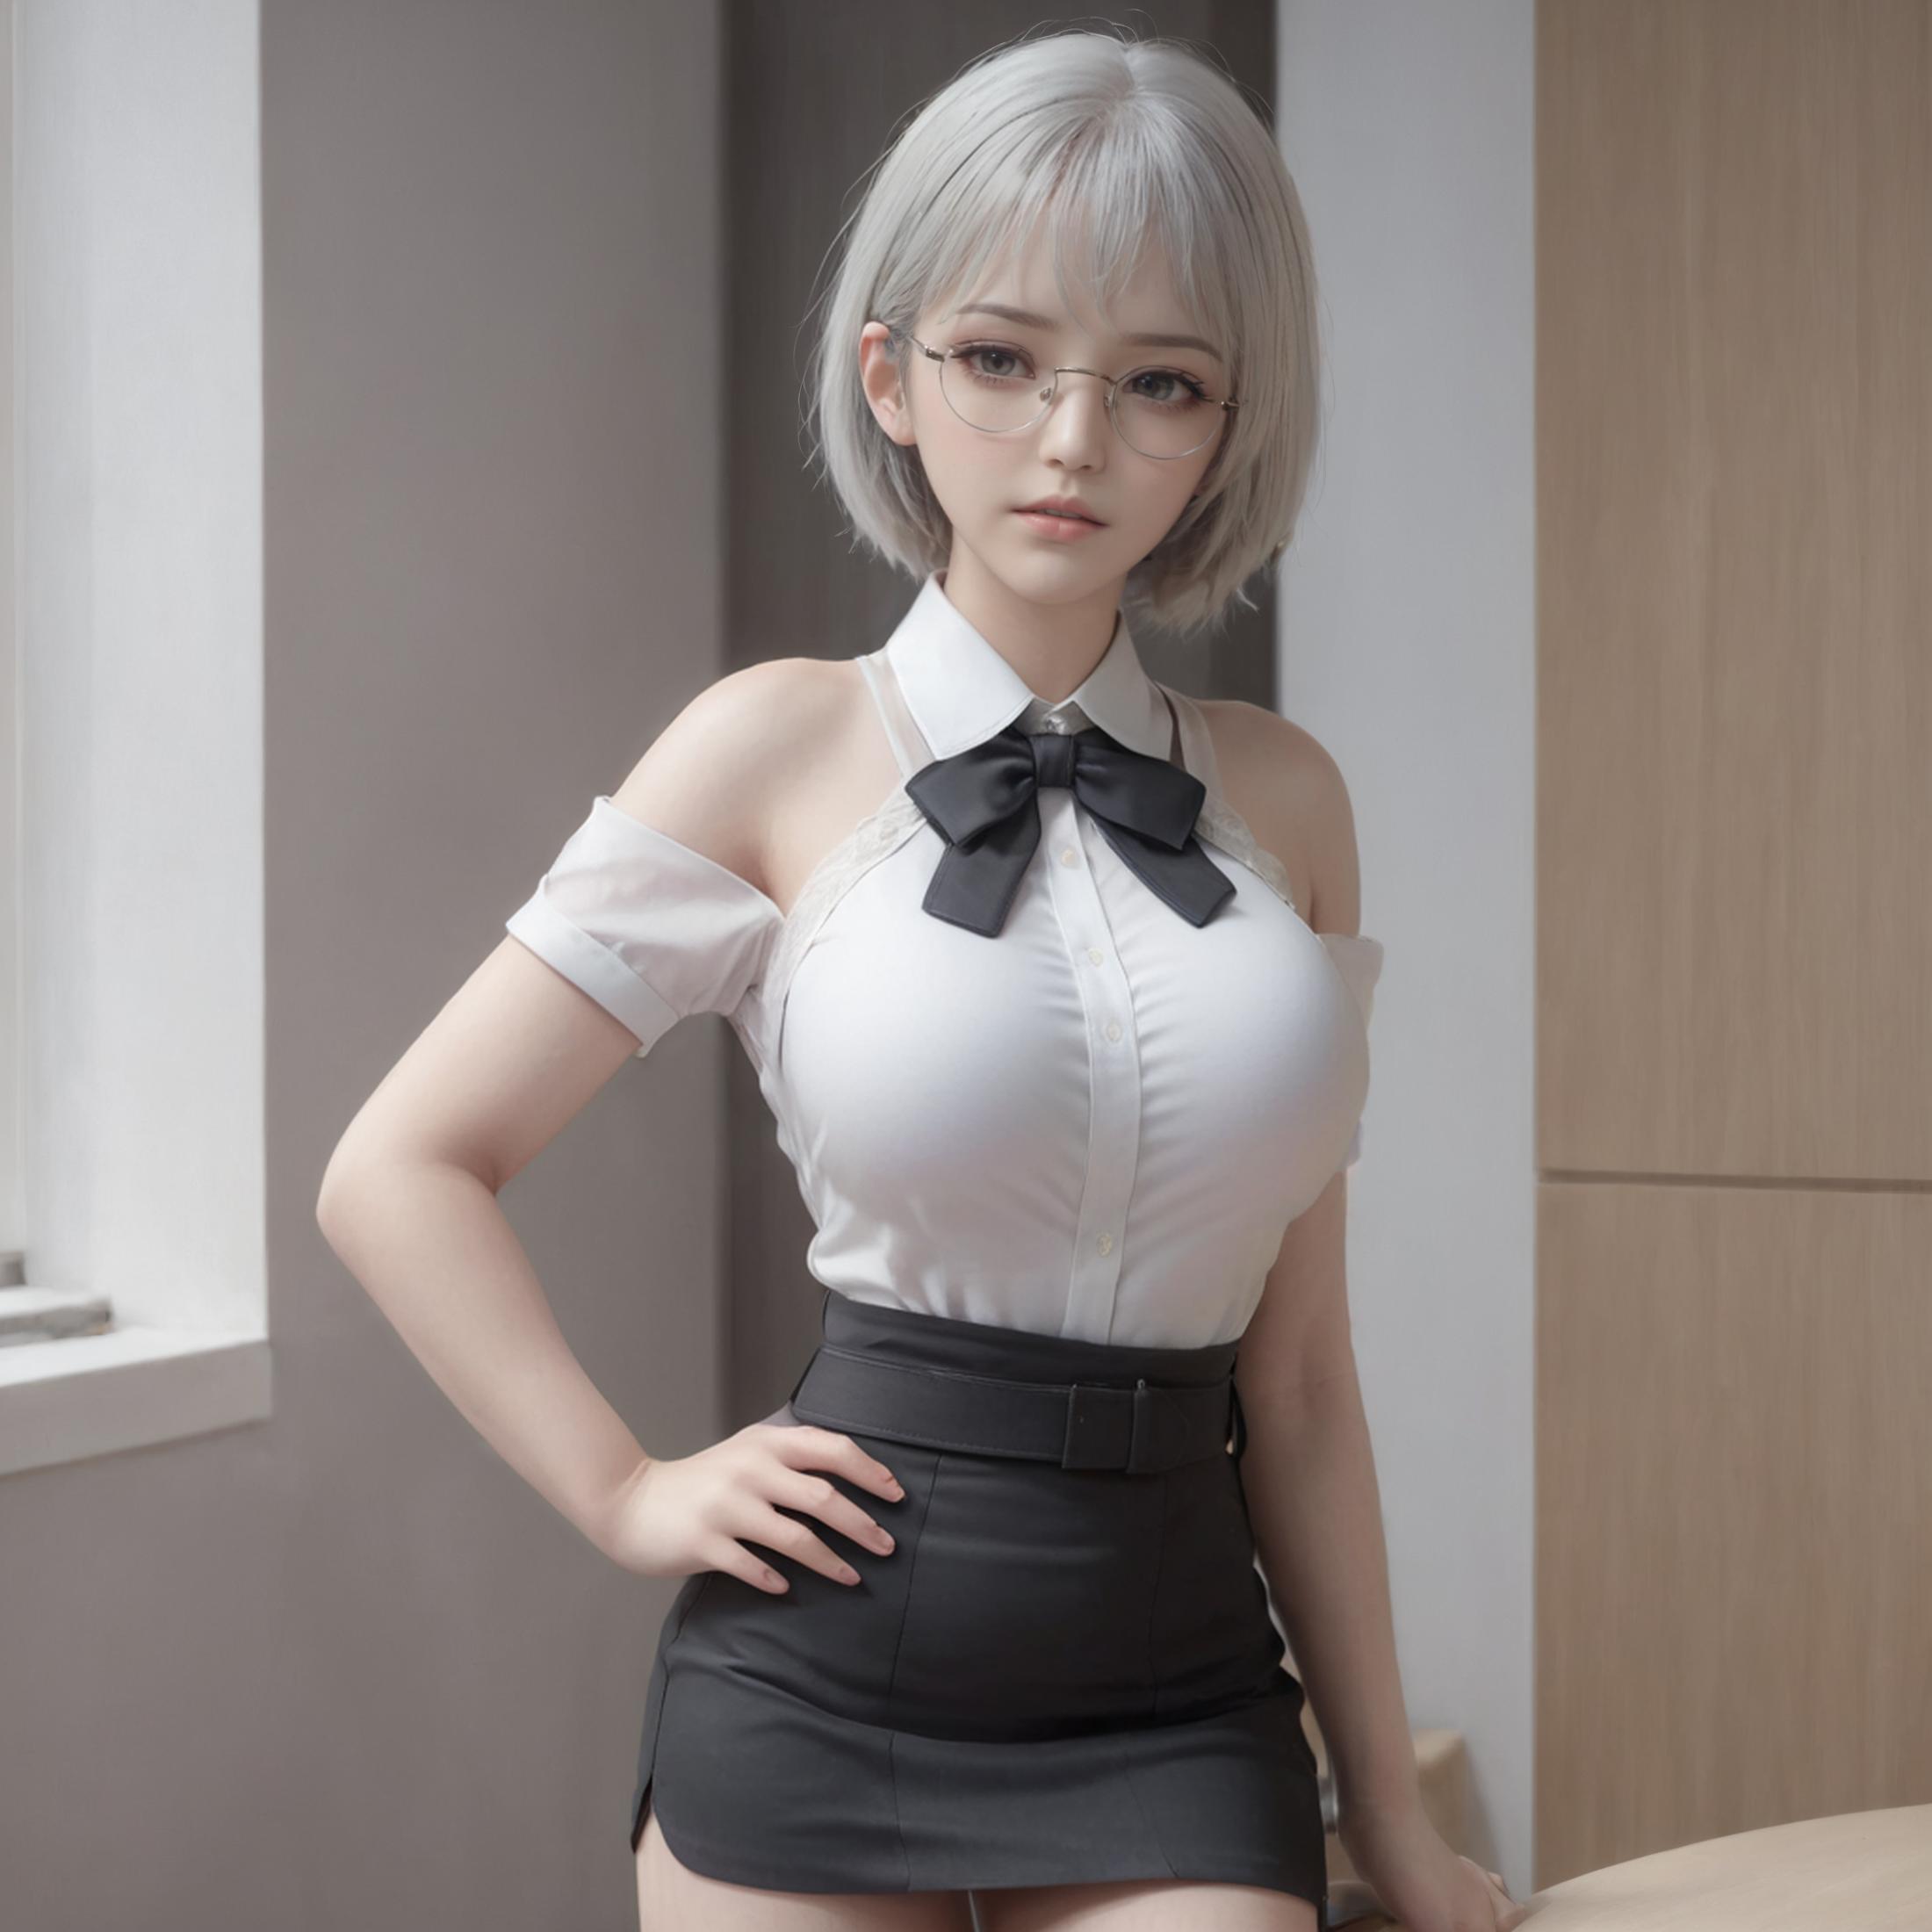 AI model image by 290190625818